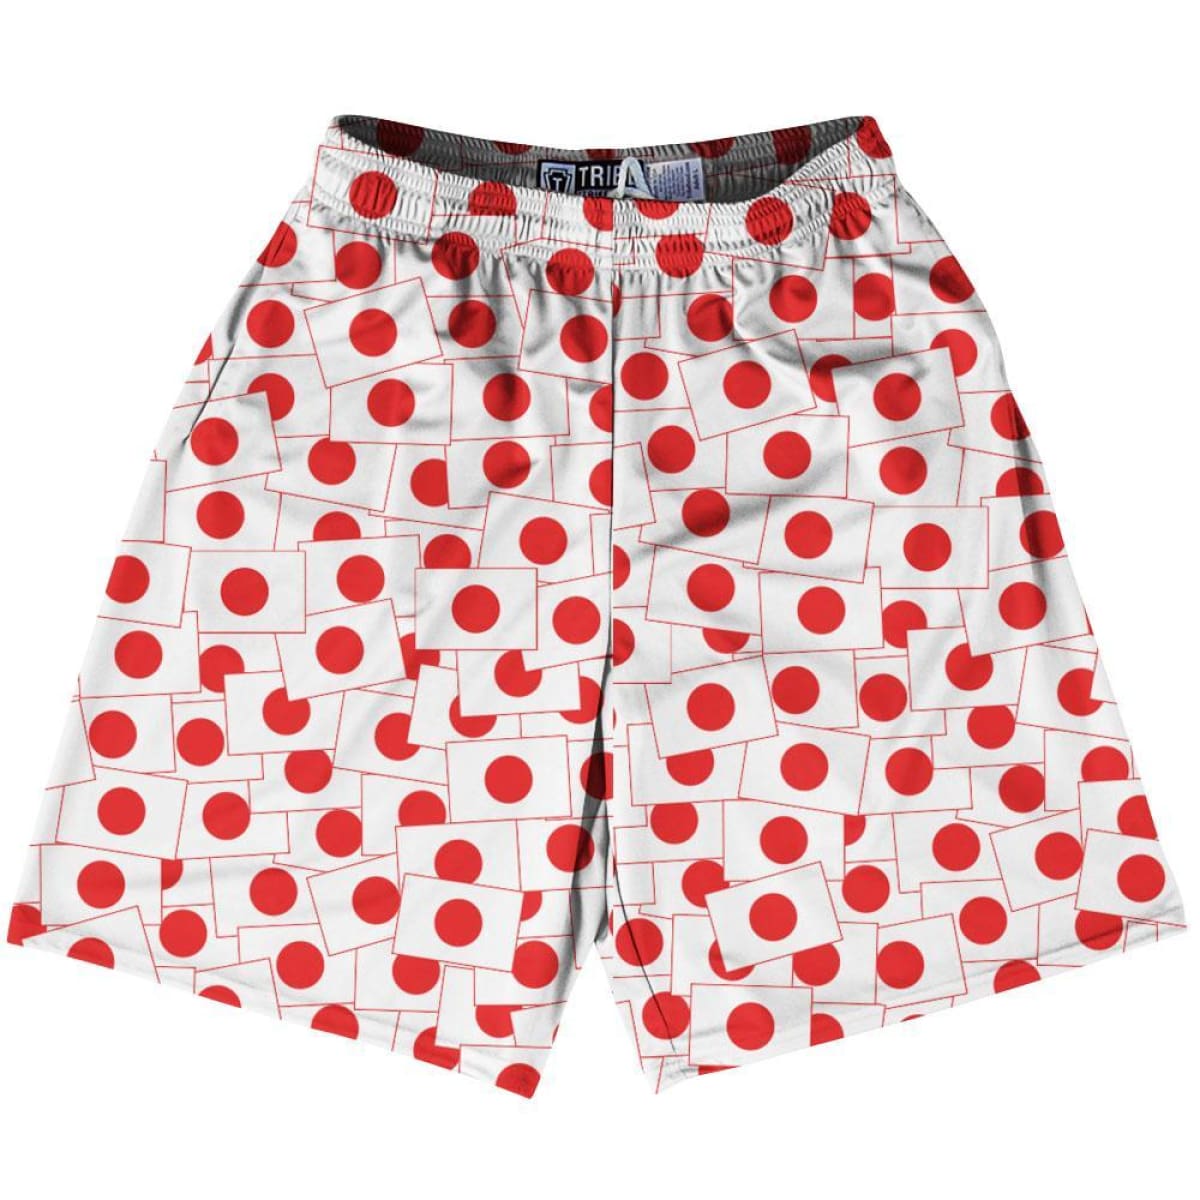 Ultras - Tribe Japan Party Flags Lacrosse Shorts